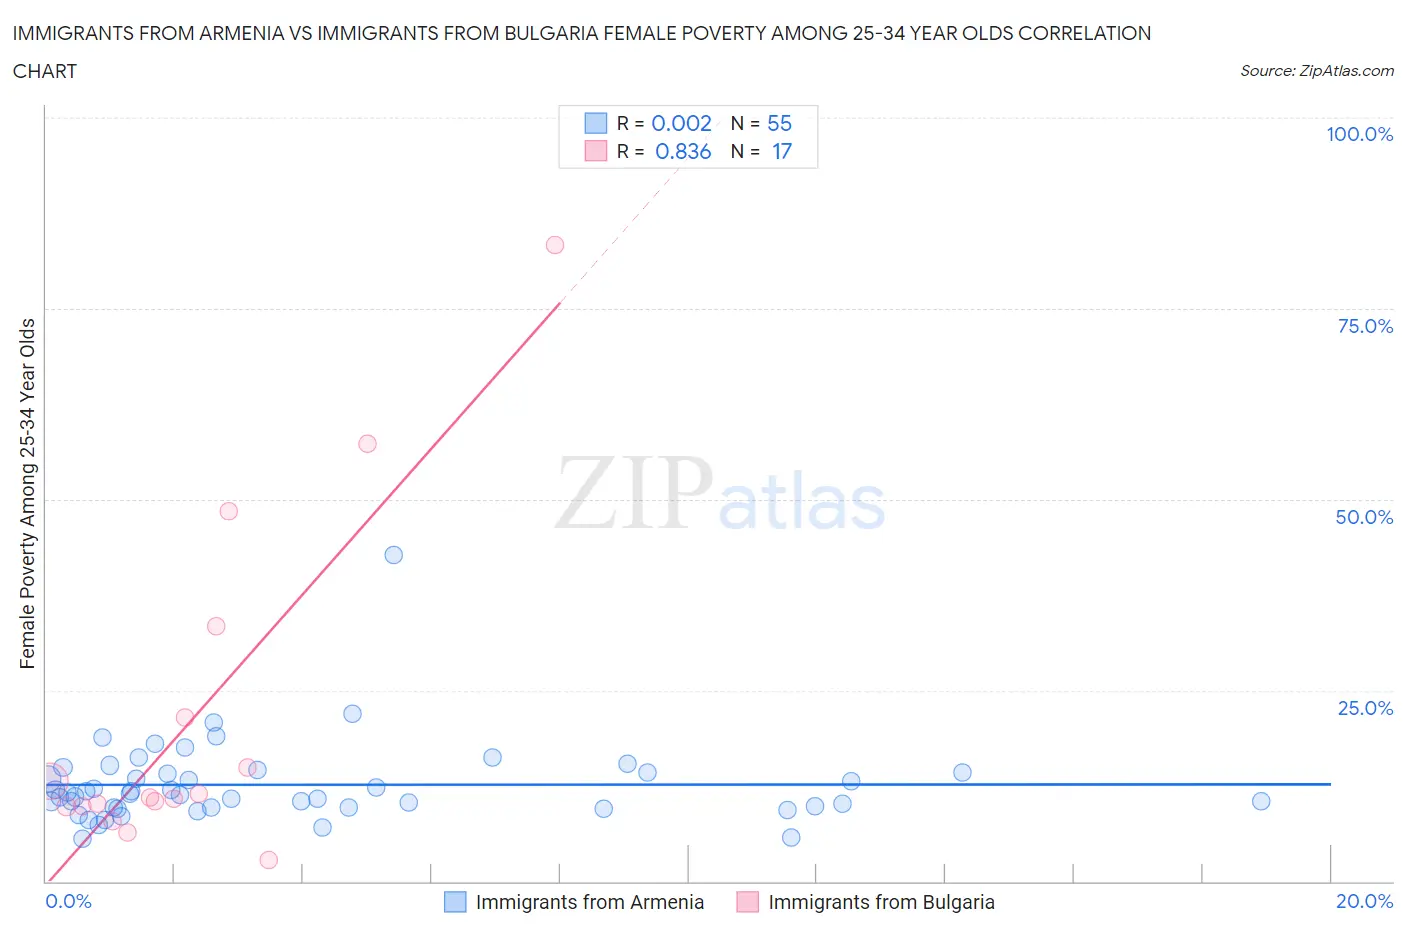 Immigrants from Armenia vs Immigrants from Bulgaria Female Poverty Among 25-34 Year Olds